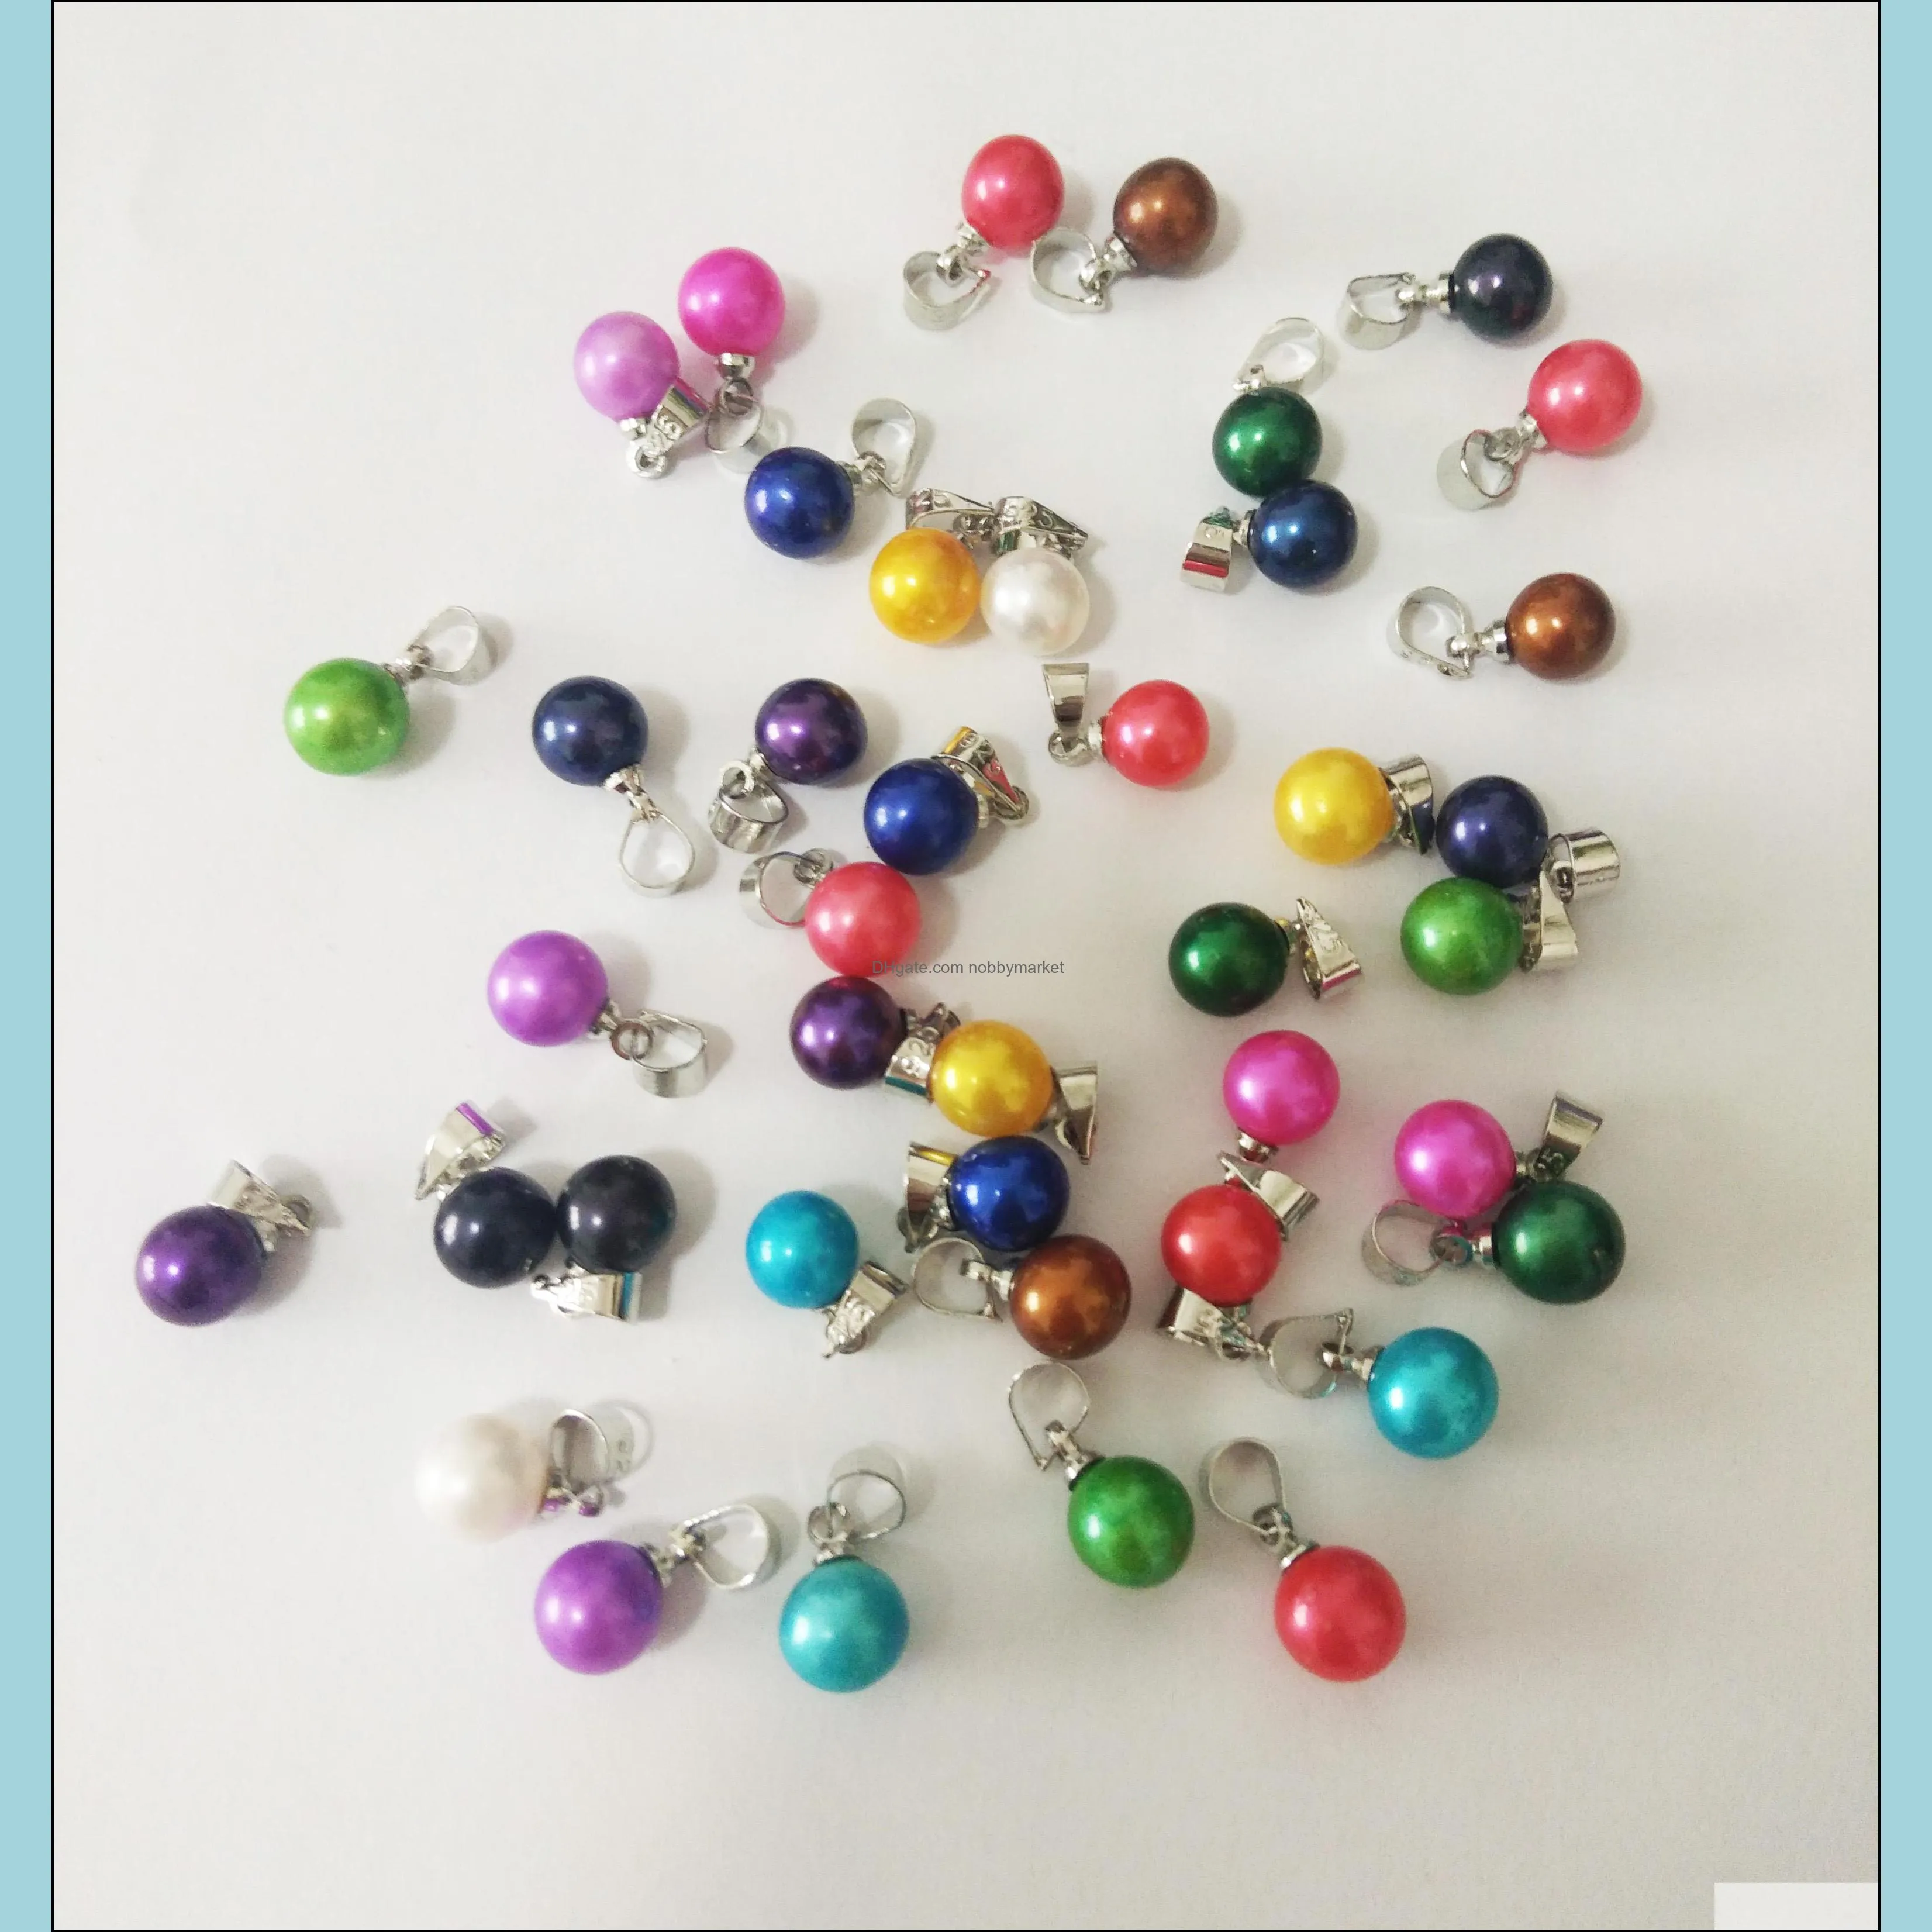 10Pcs Loose Round Pearl Pendant 6-8mm Size In Random Freshwater Round Pearl Simple Pendants Mixed Color Love Wish Best Gift for Women